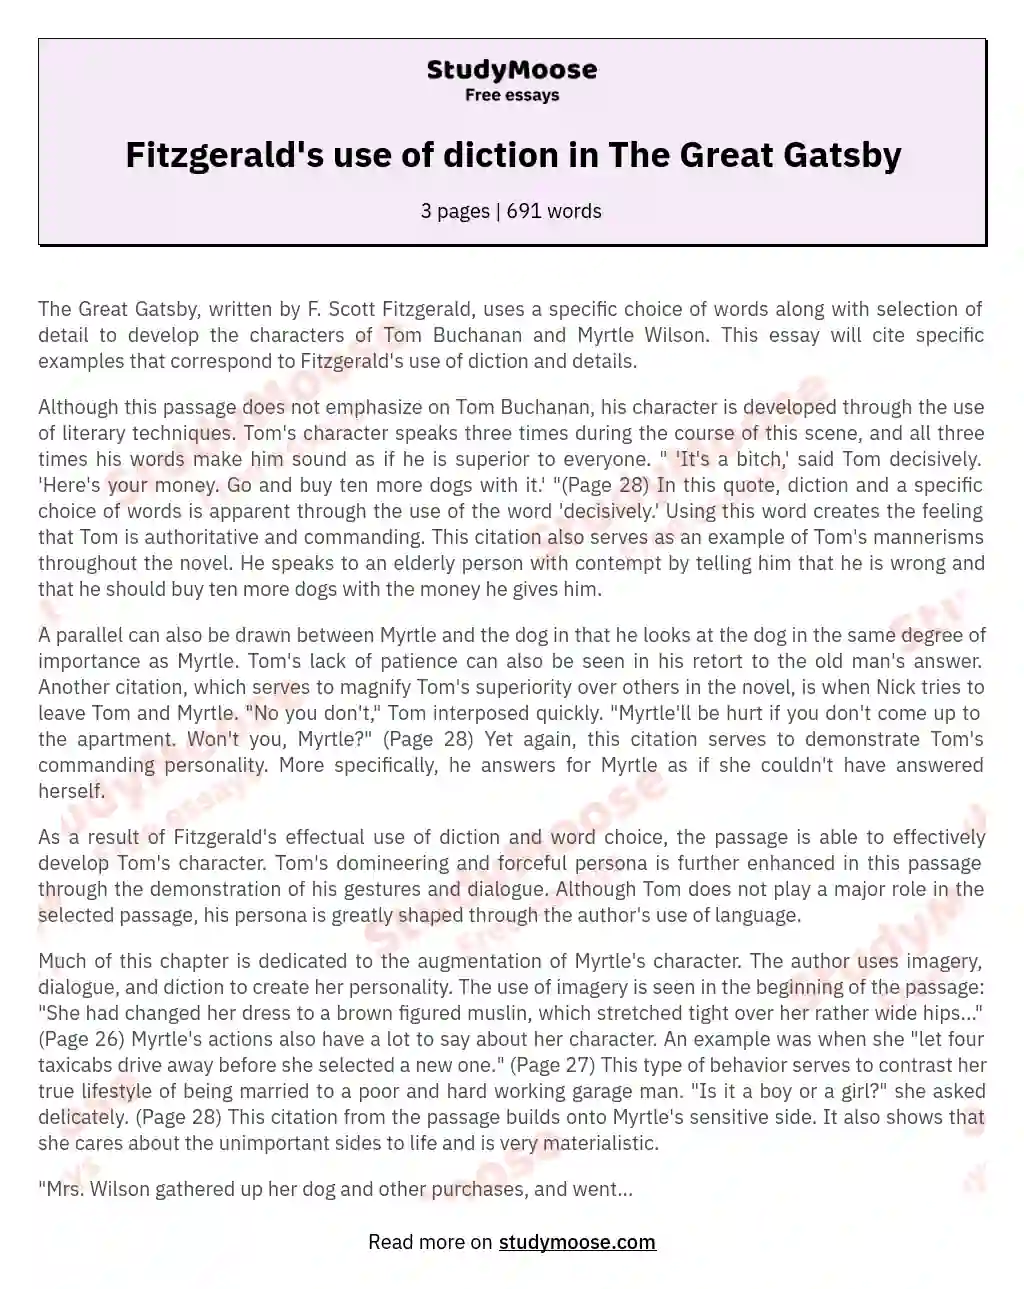 Fitzgerald's use of diction in The Great Gatsby